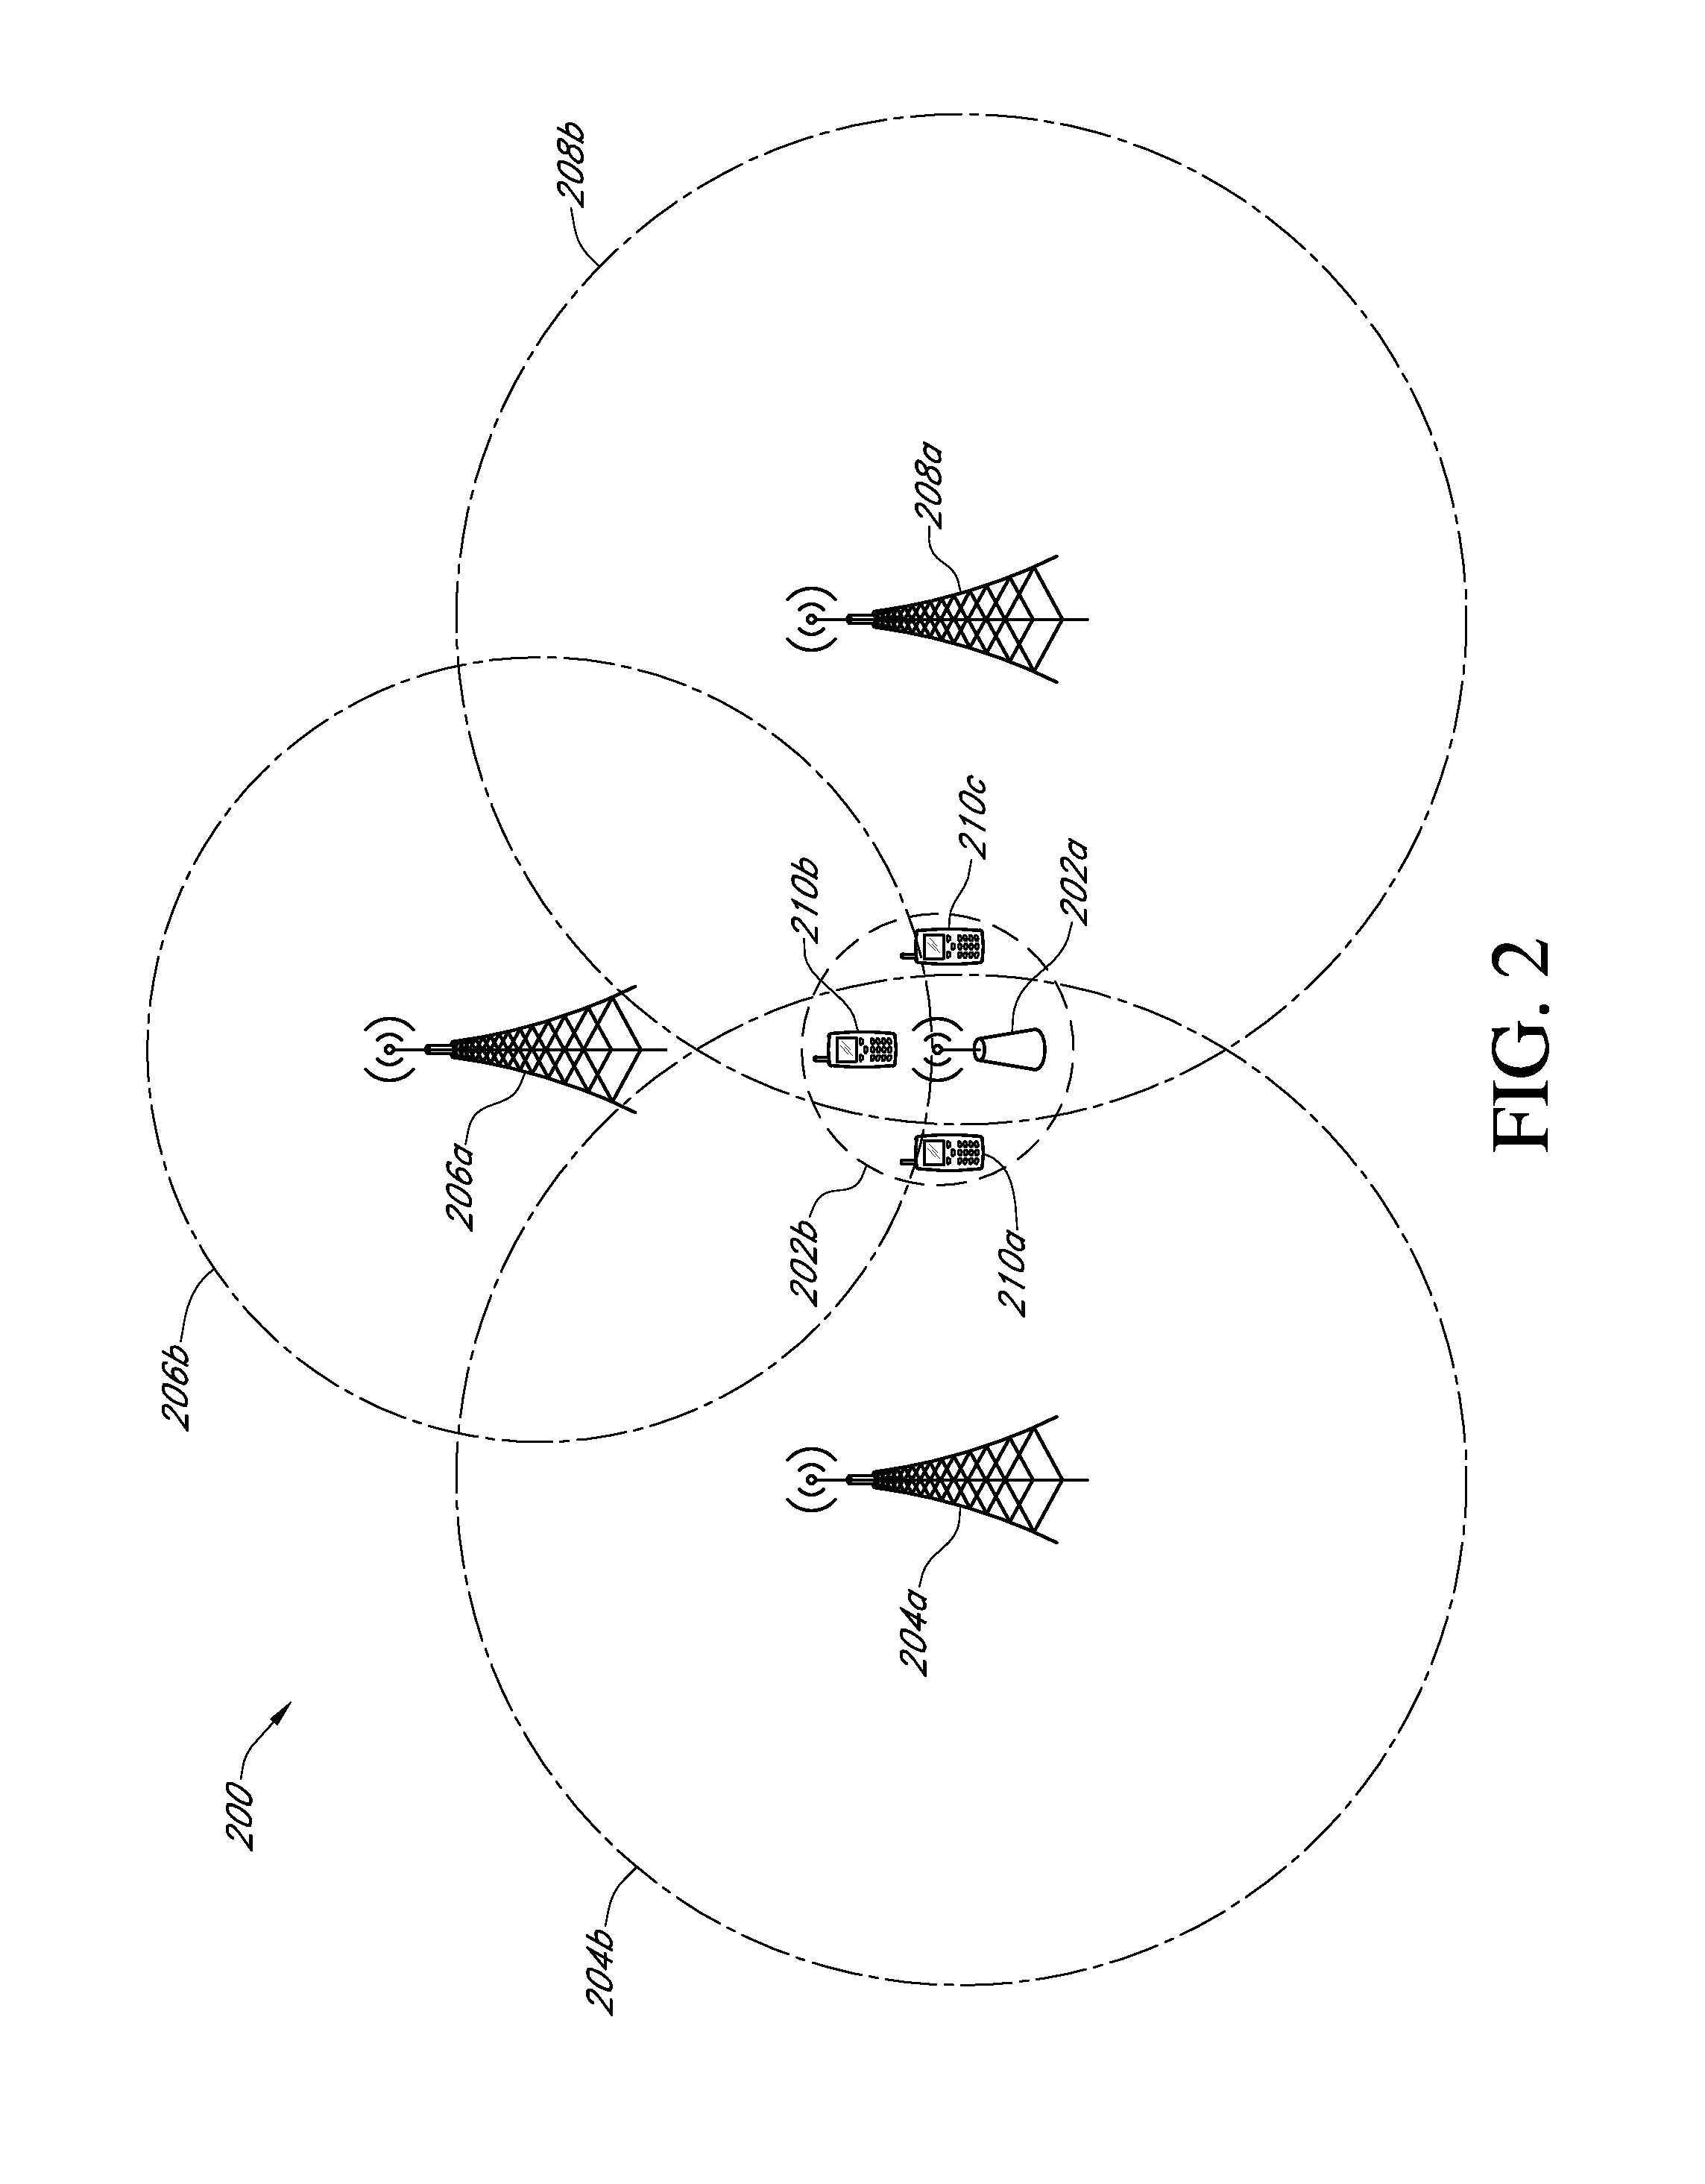 Systems and methods for optimizing short range wireless communications within a larger wireless network